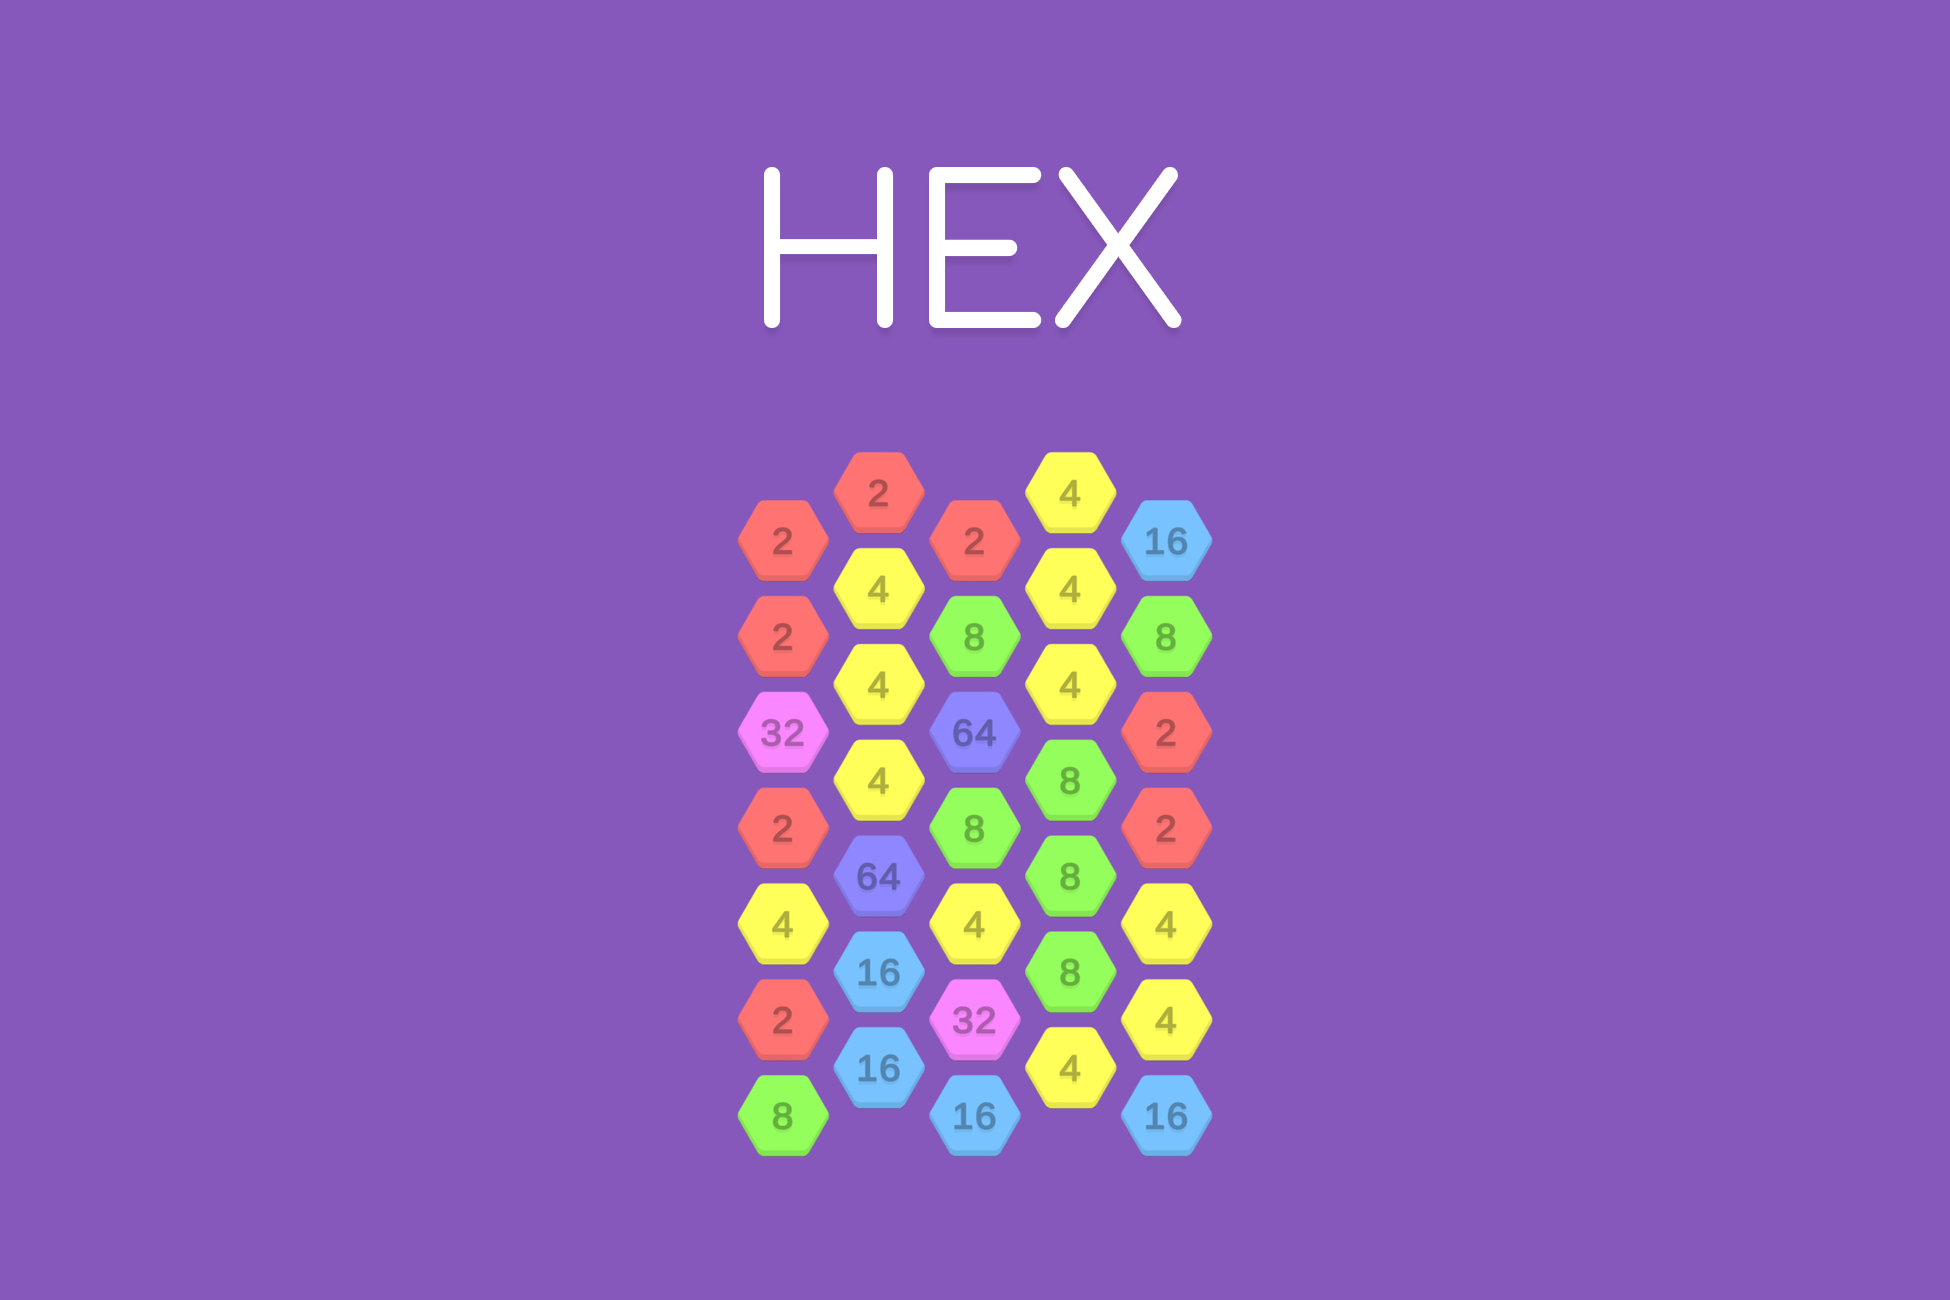 hex-unity-game-template-by-ilumisoft